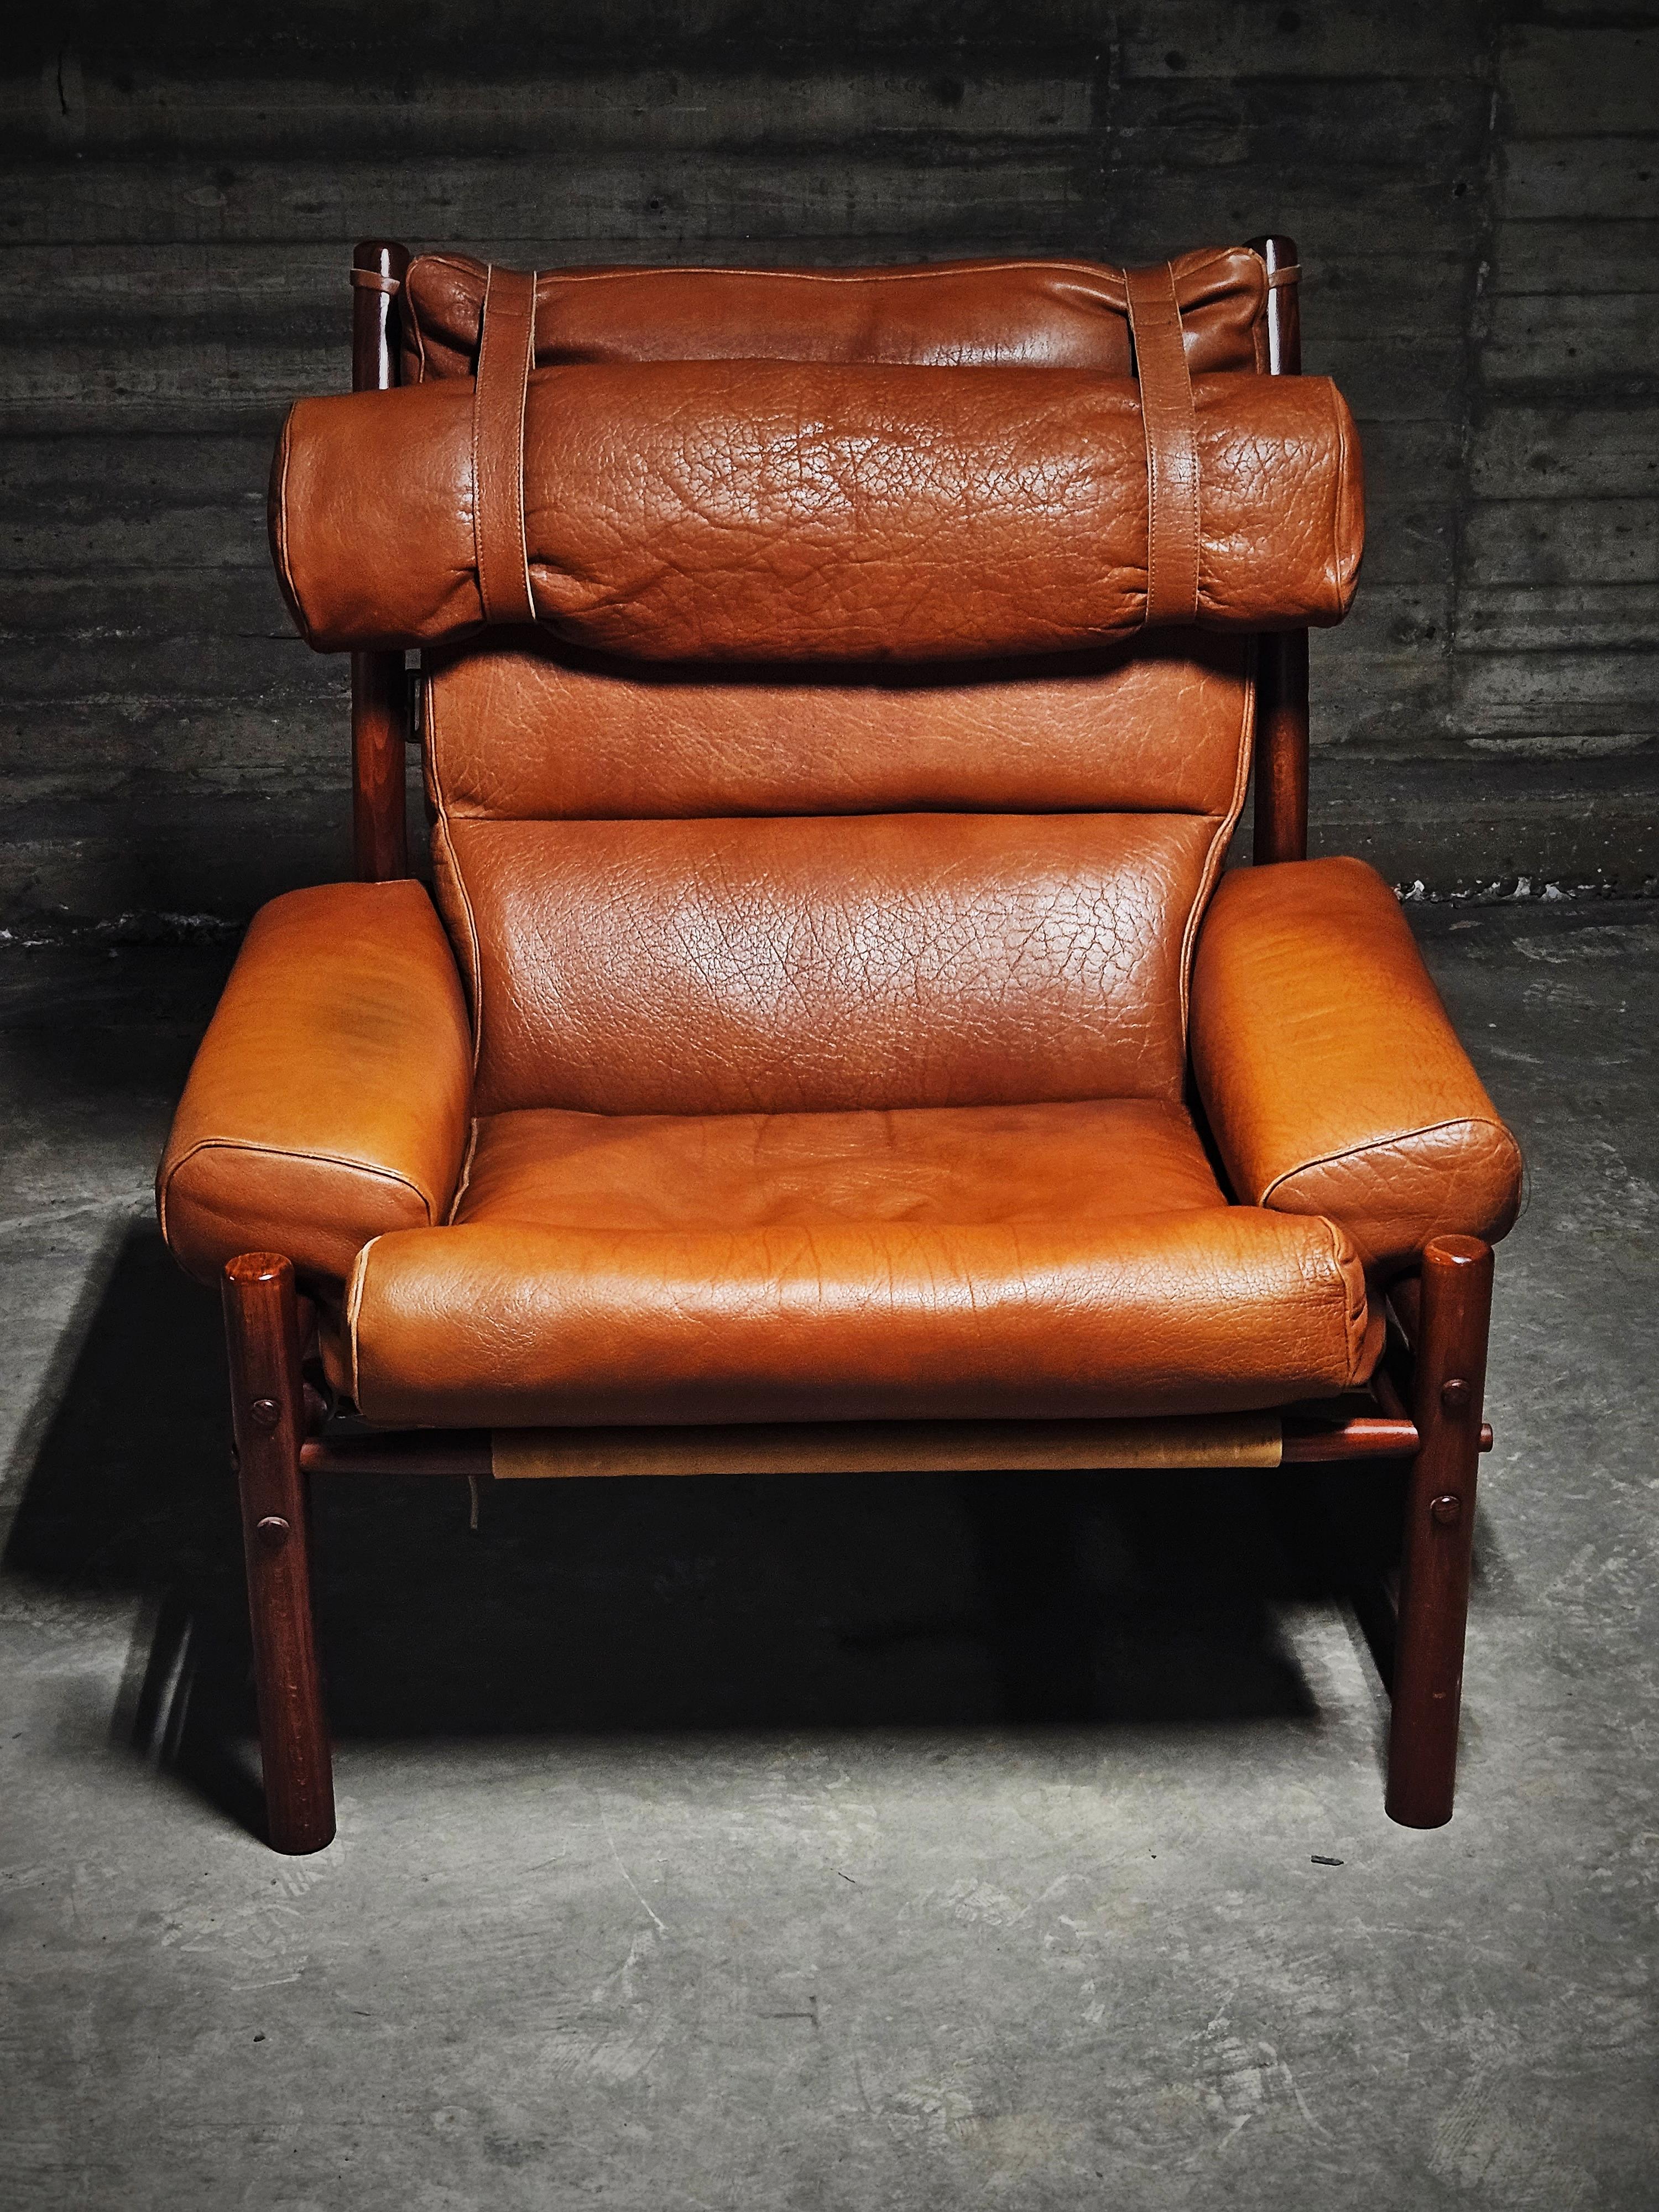 Arne Norell, 'Inca' lounge chair with ottoman, cognac leather and beech. Produced by his own firm in the middle of the 20th century. 

The design is luxurious with its generous proportions. It is also very comfortable. 

Very good vintage condition